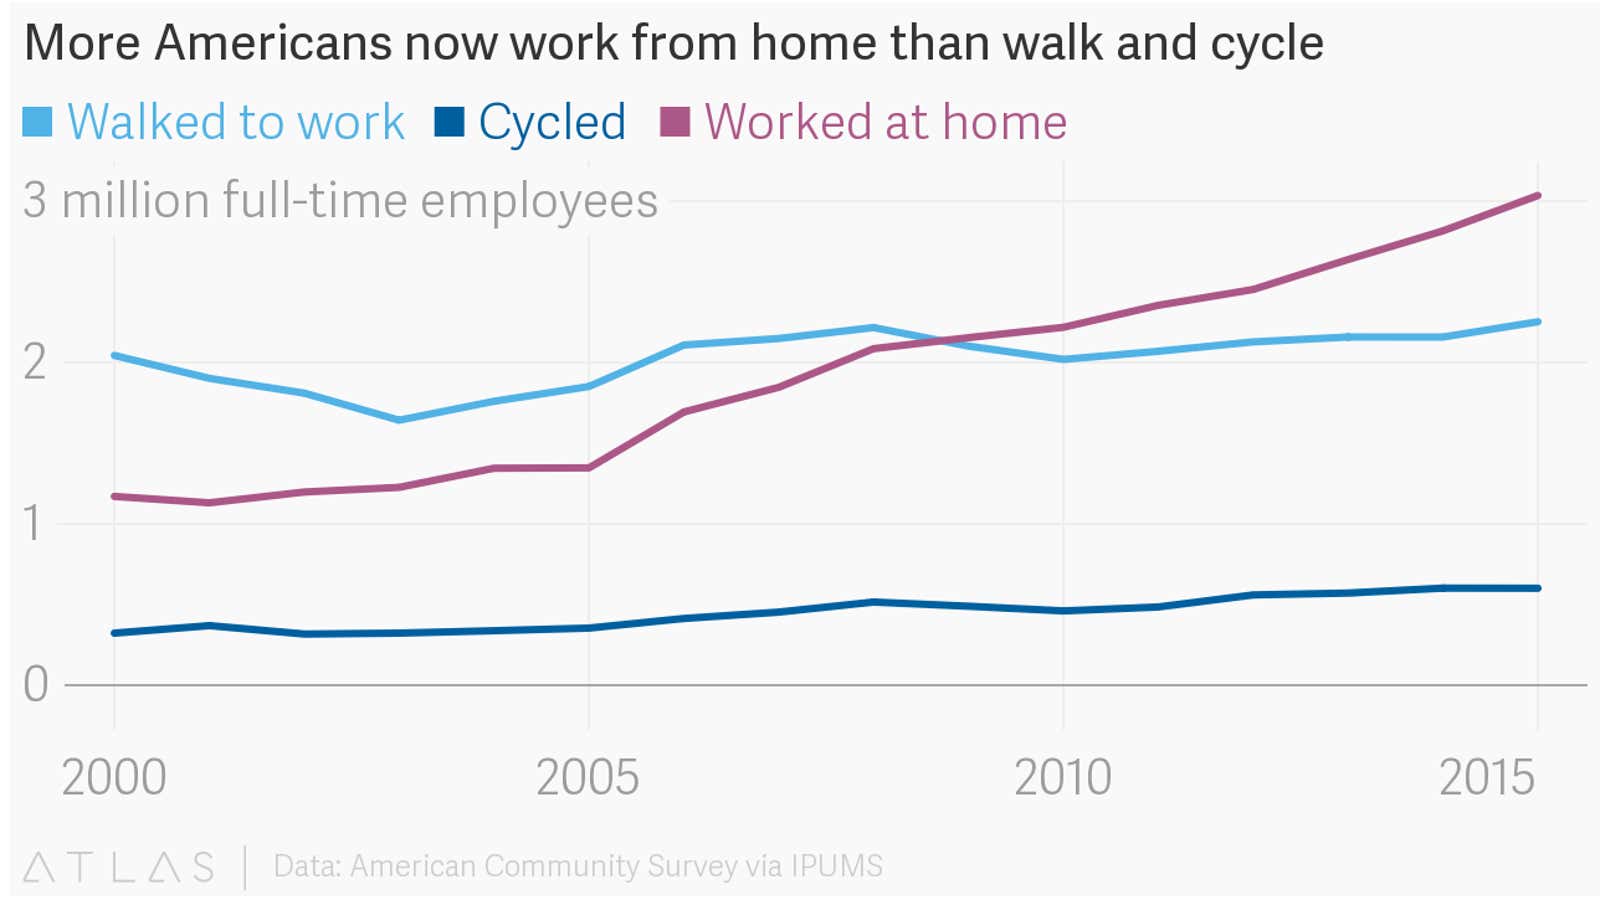 More Americans now work from home than walk and cycle